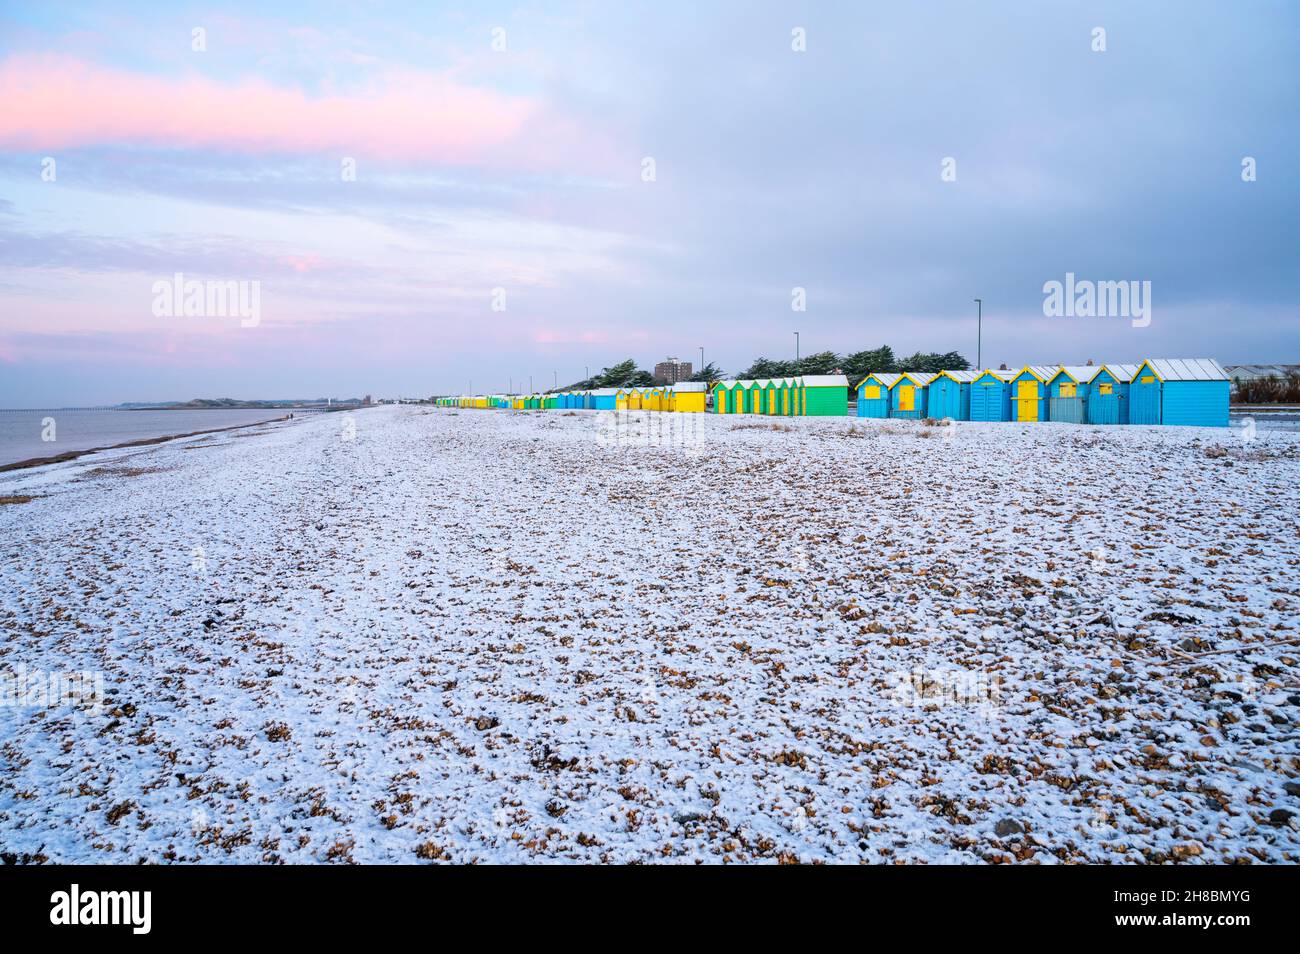 Littlehampton, West Sussex, UK. Monday 29th November 2021. The beach at Littlehampton with remaining snow after last night's snowfall, on a freezing cold morning on the South Coast. Credit: Geoff Smith/Alamy Live News Stock Photo